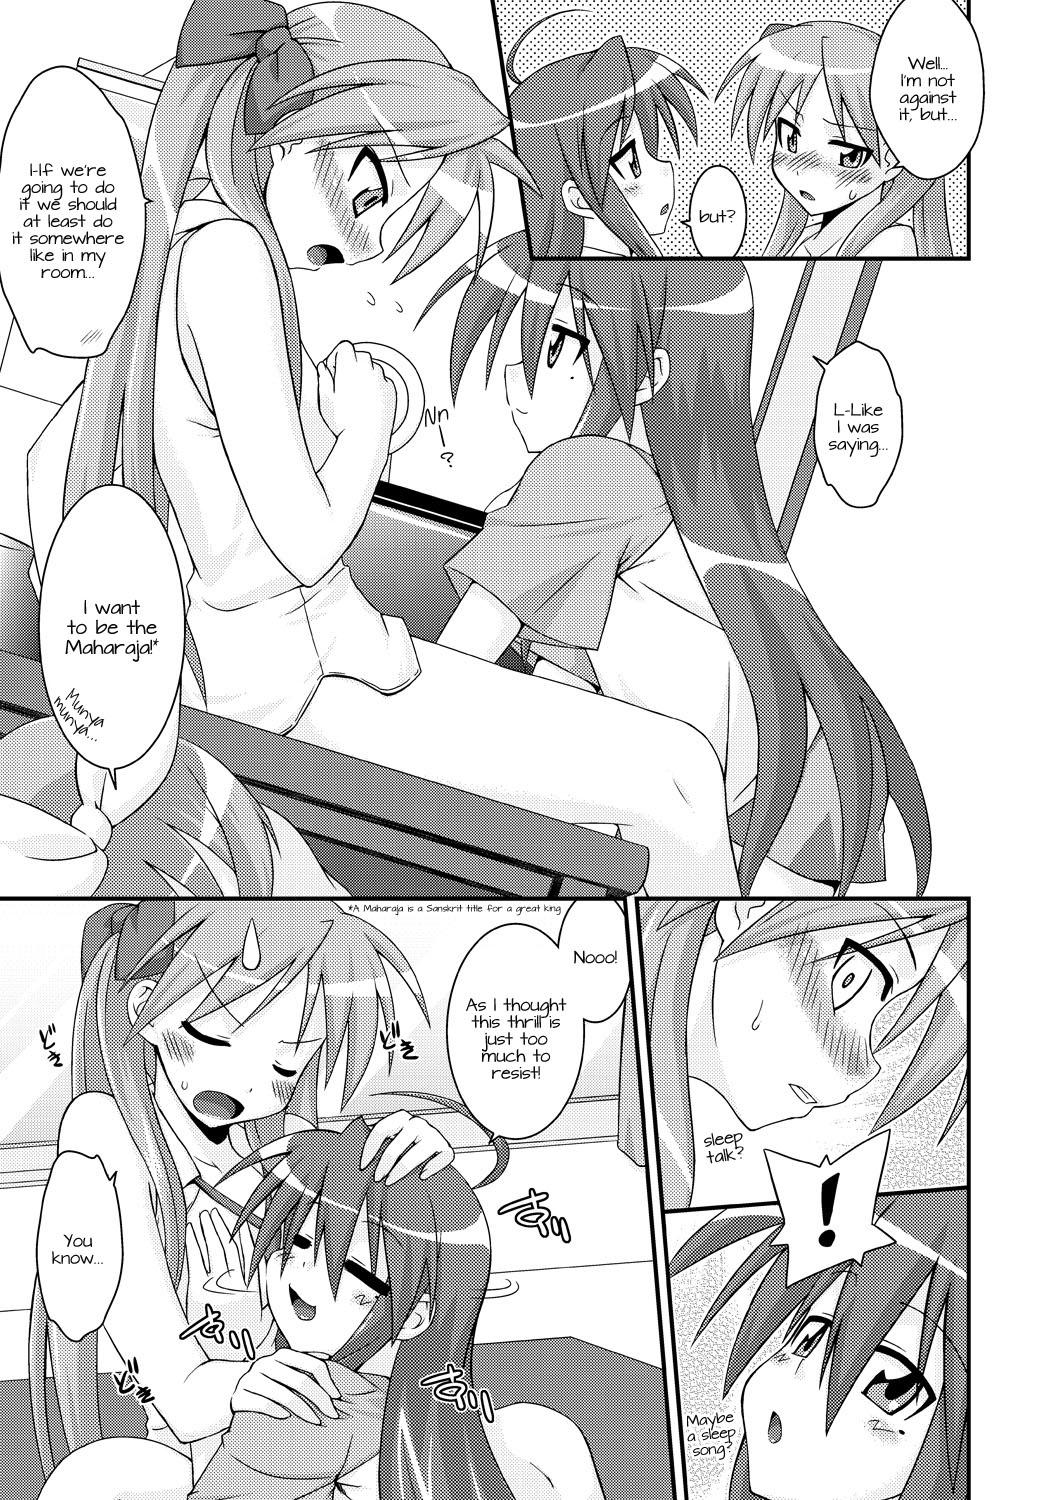 Italian Jam Star - Lucky star Pica - Page 6